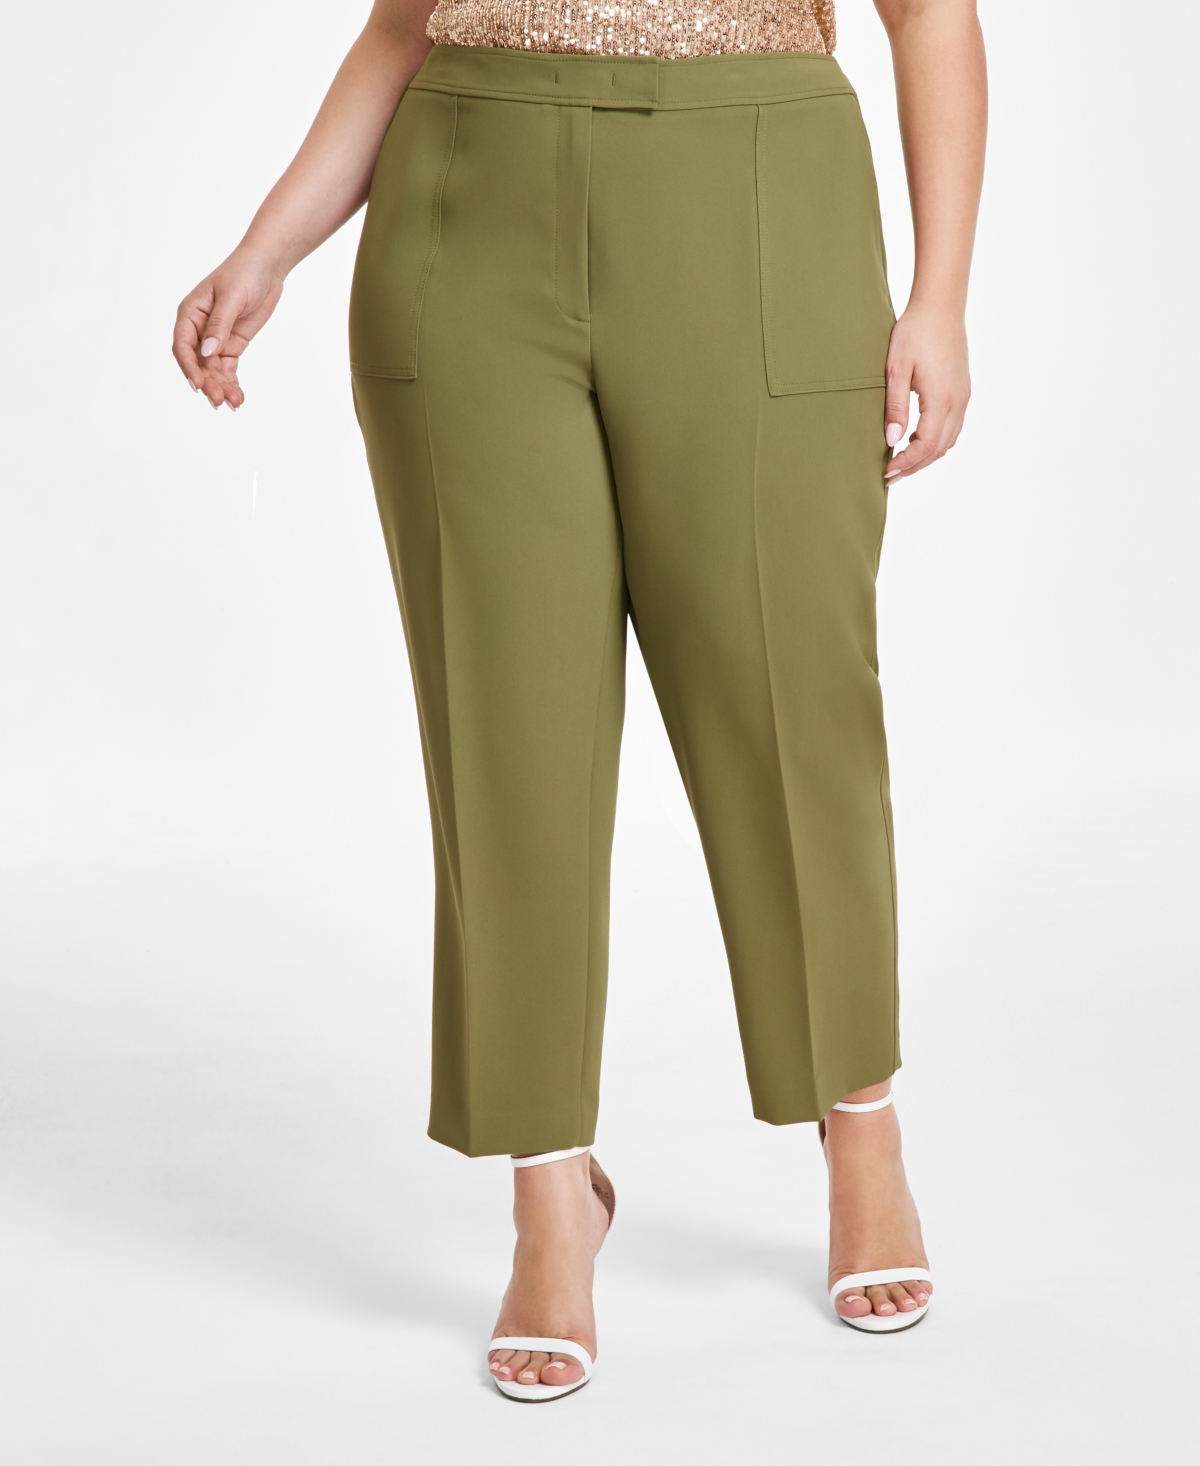 Plus Size High Rise Fly-Front Ankle Pants - Bay Leaf